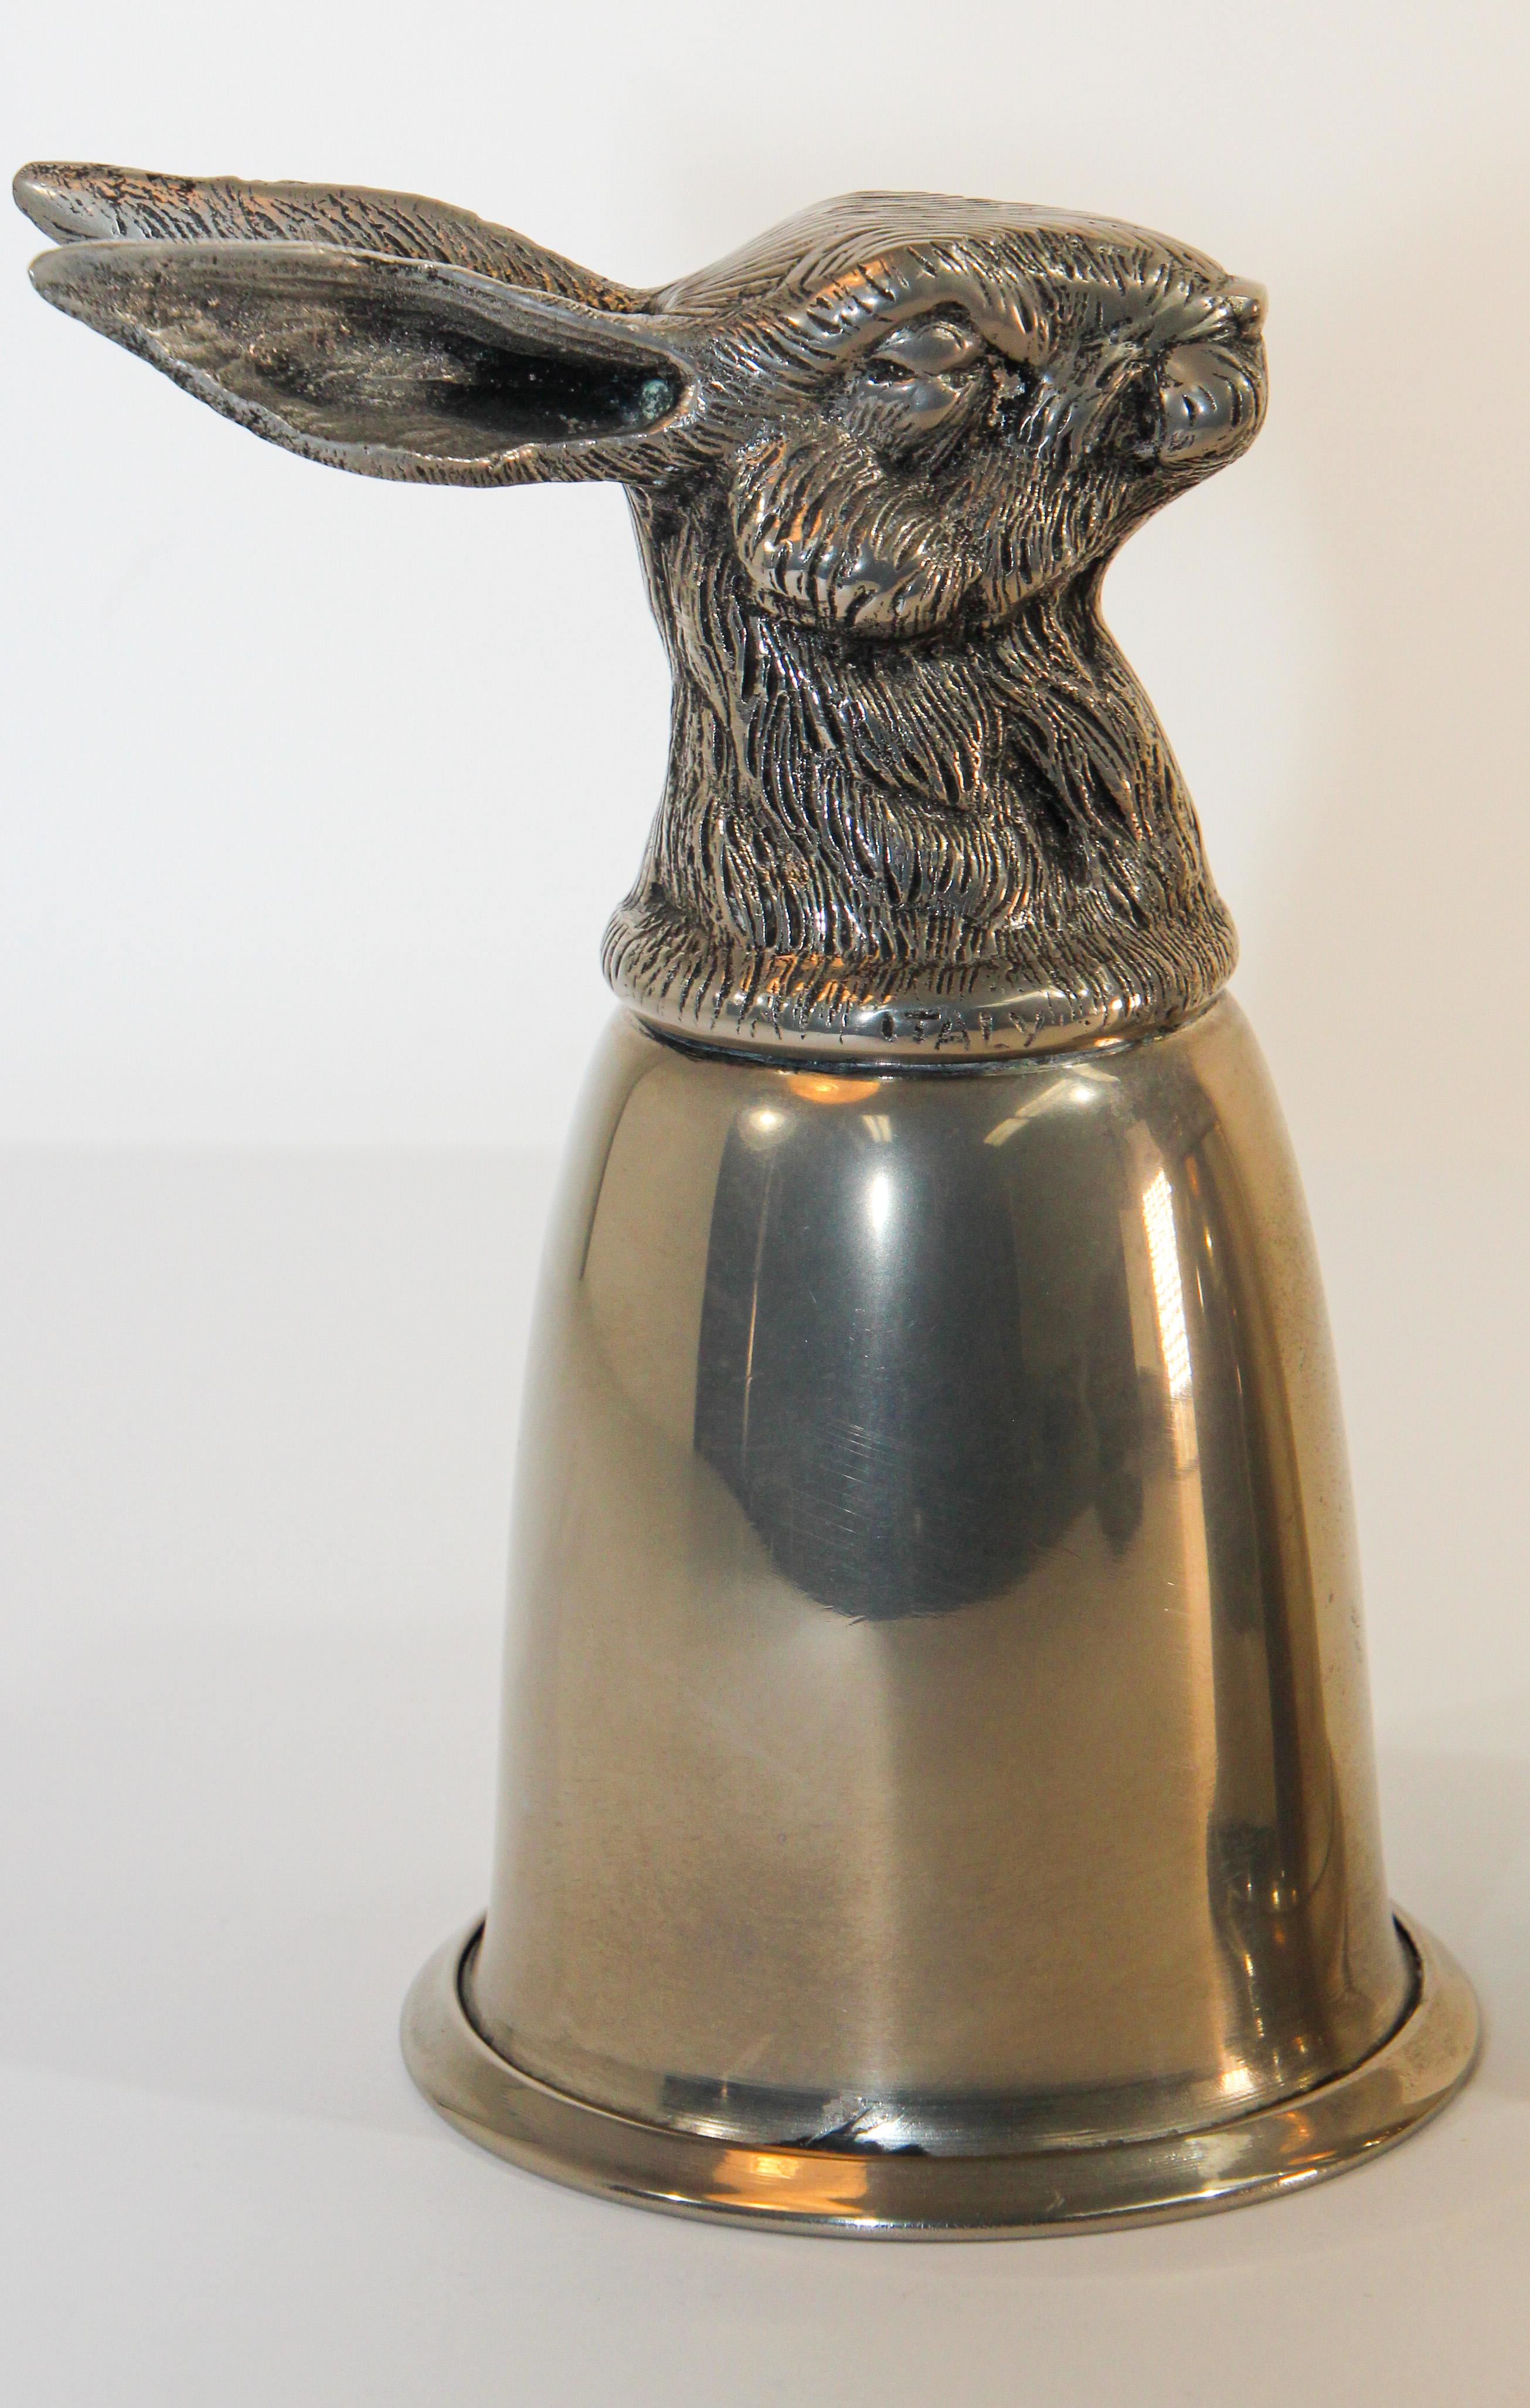 Georgian GUCCI Silver Plated Animal Stirrup Cups Signed Italy, 1970s For Sale